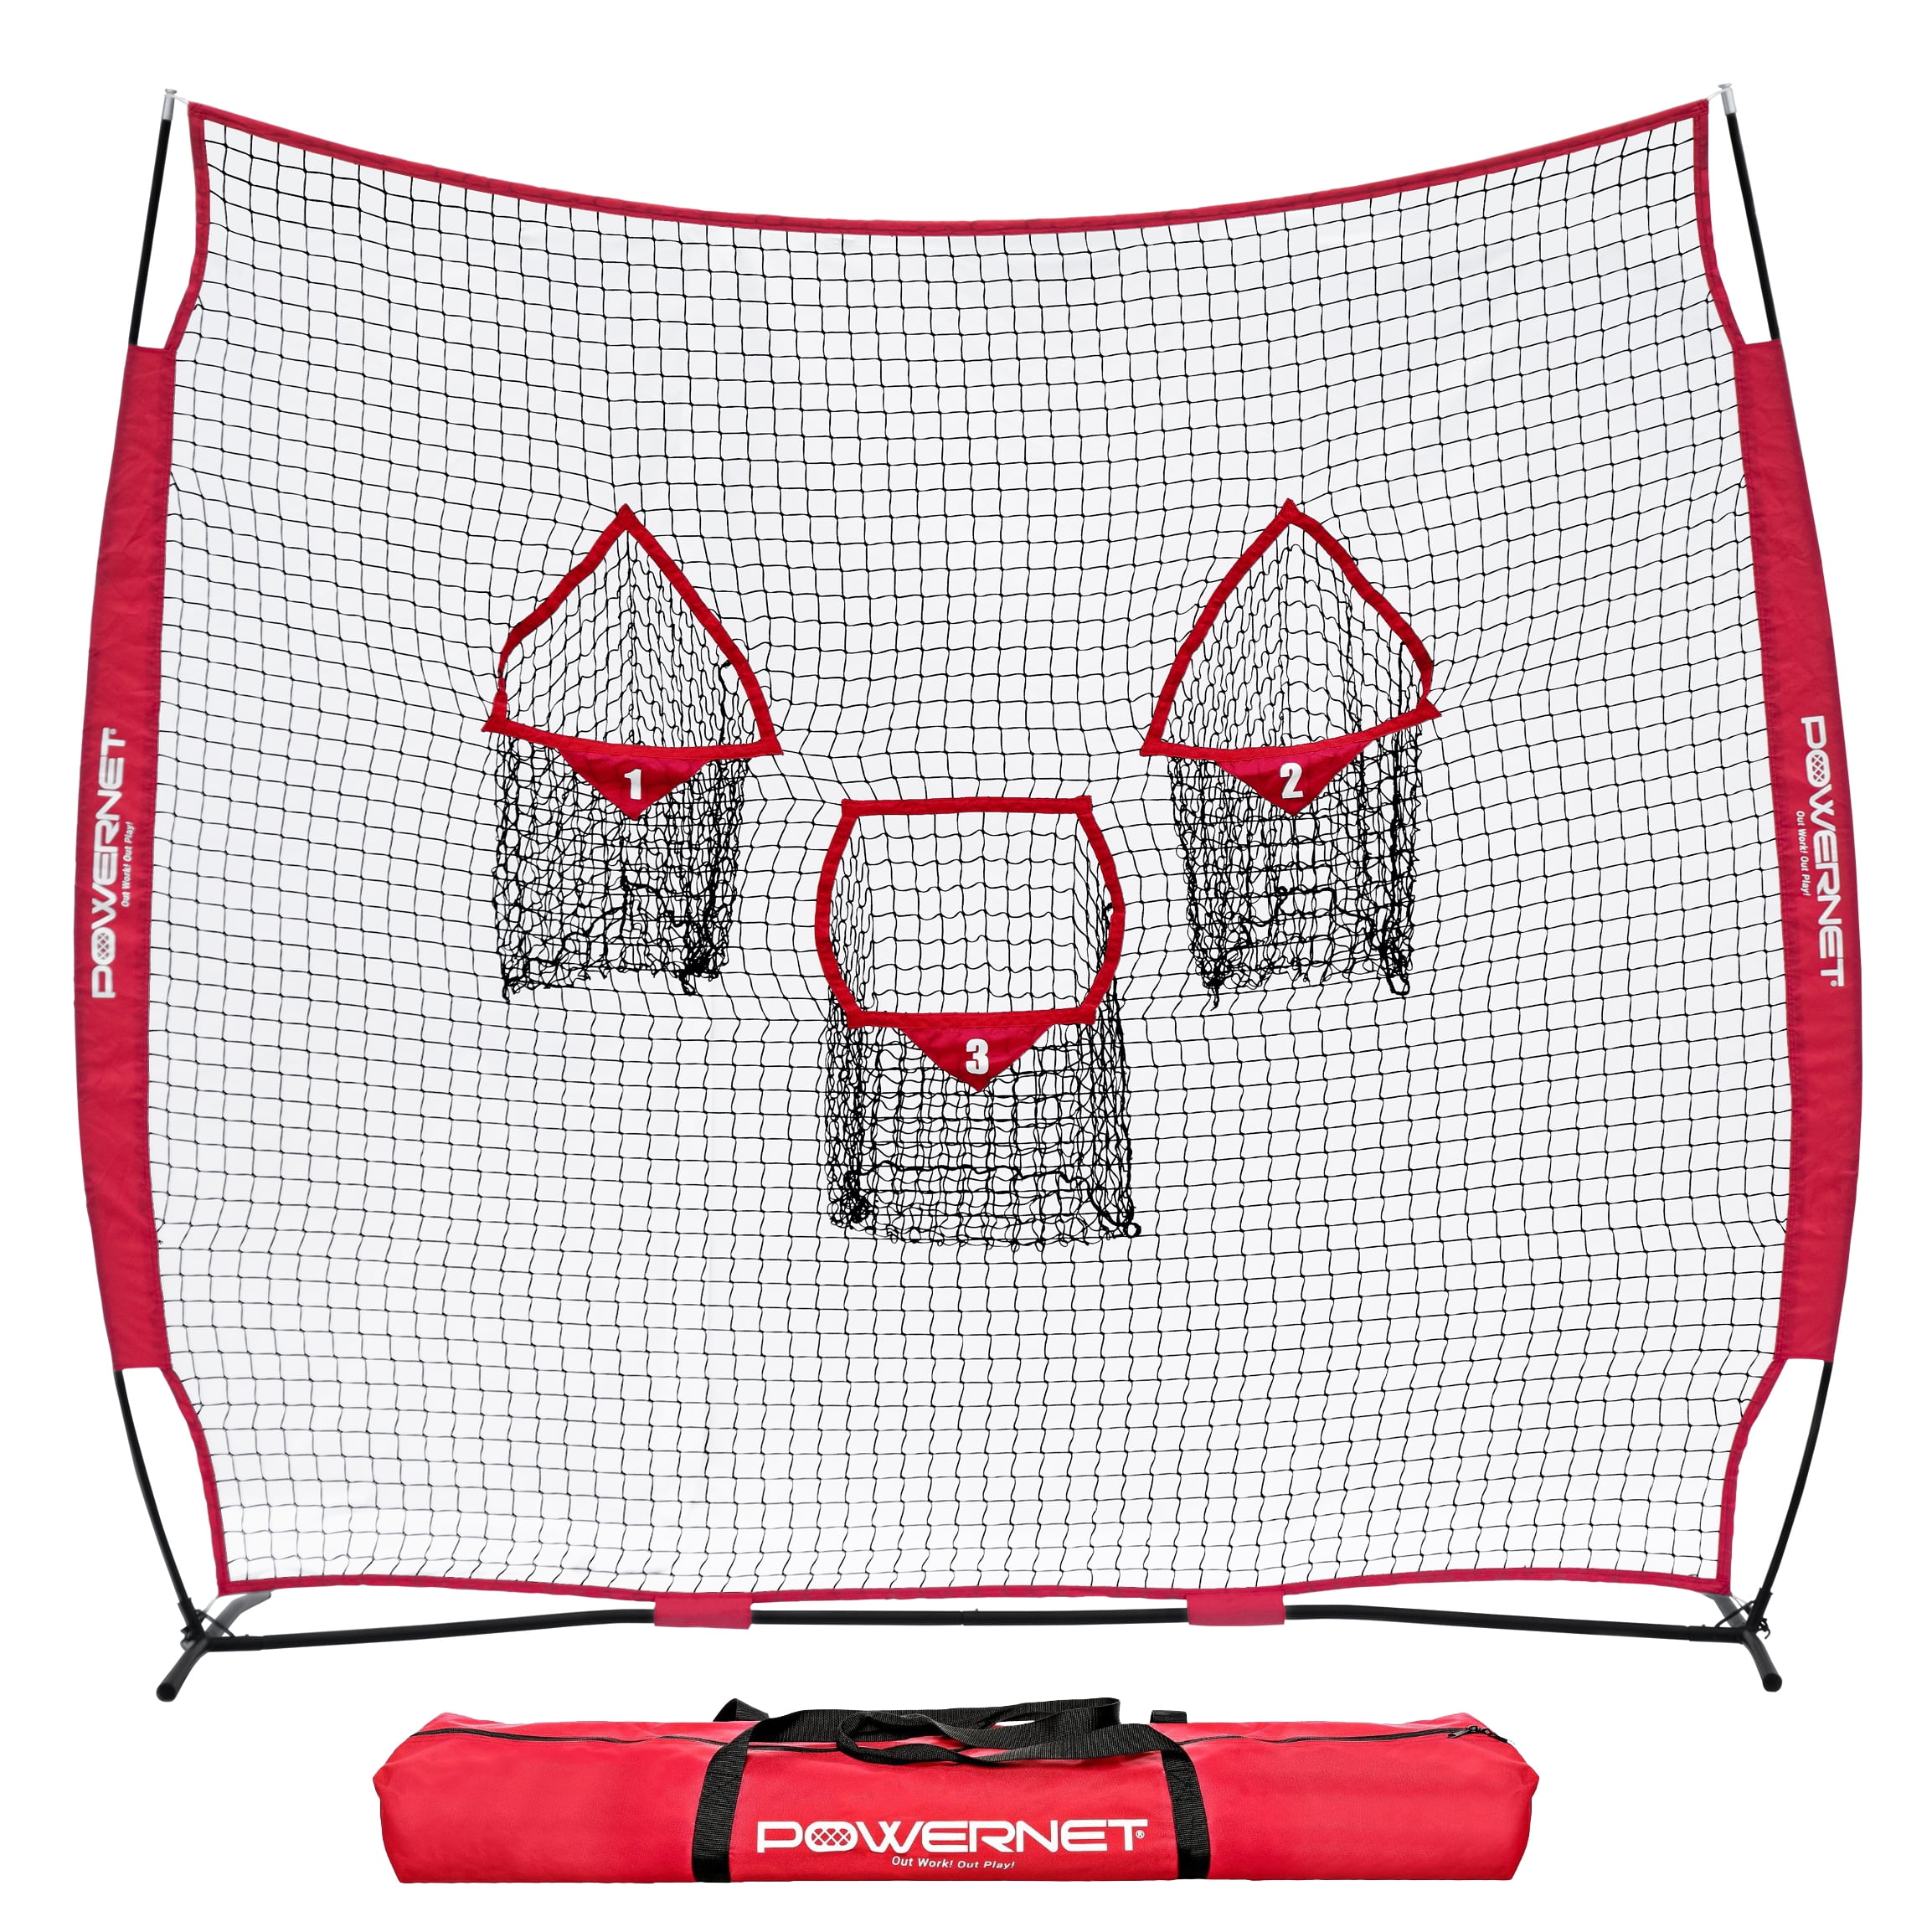 PowerNet 8x8 Ft Football 3 Pocket Net | Improve Throwing Passing Accuracy |  Durable Training Equipment for Everyday Quarterback Use